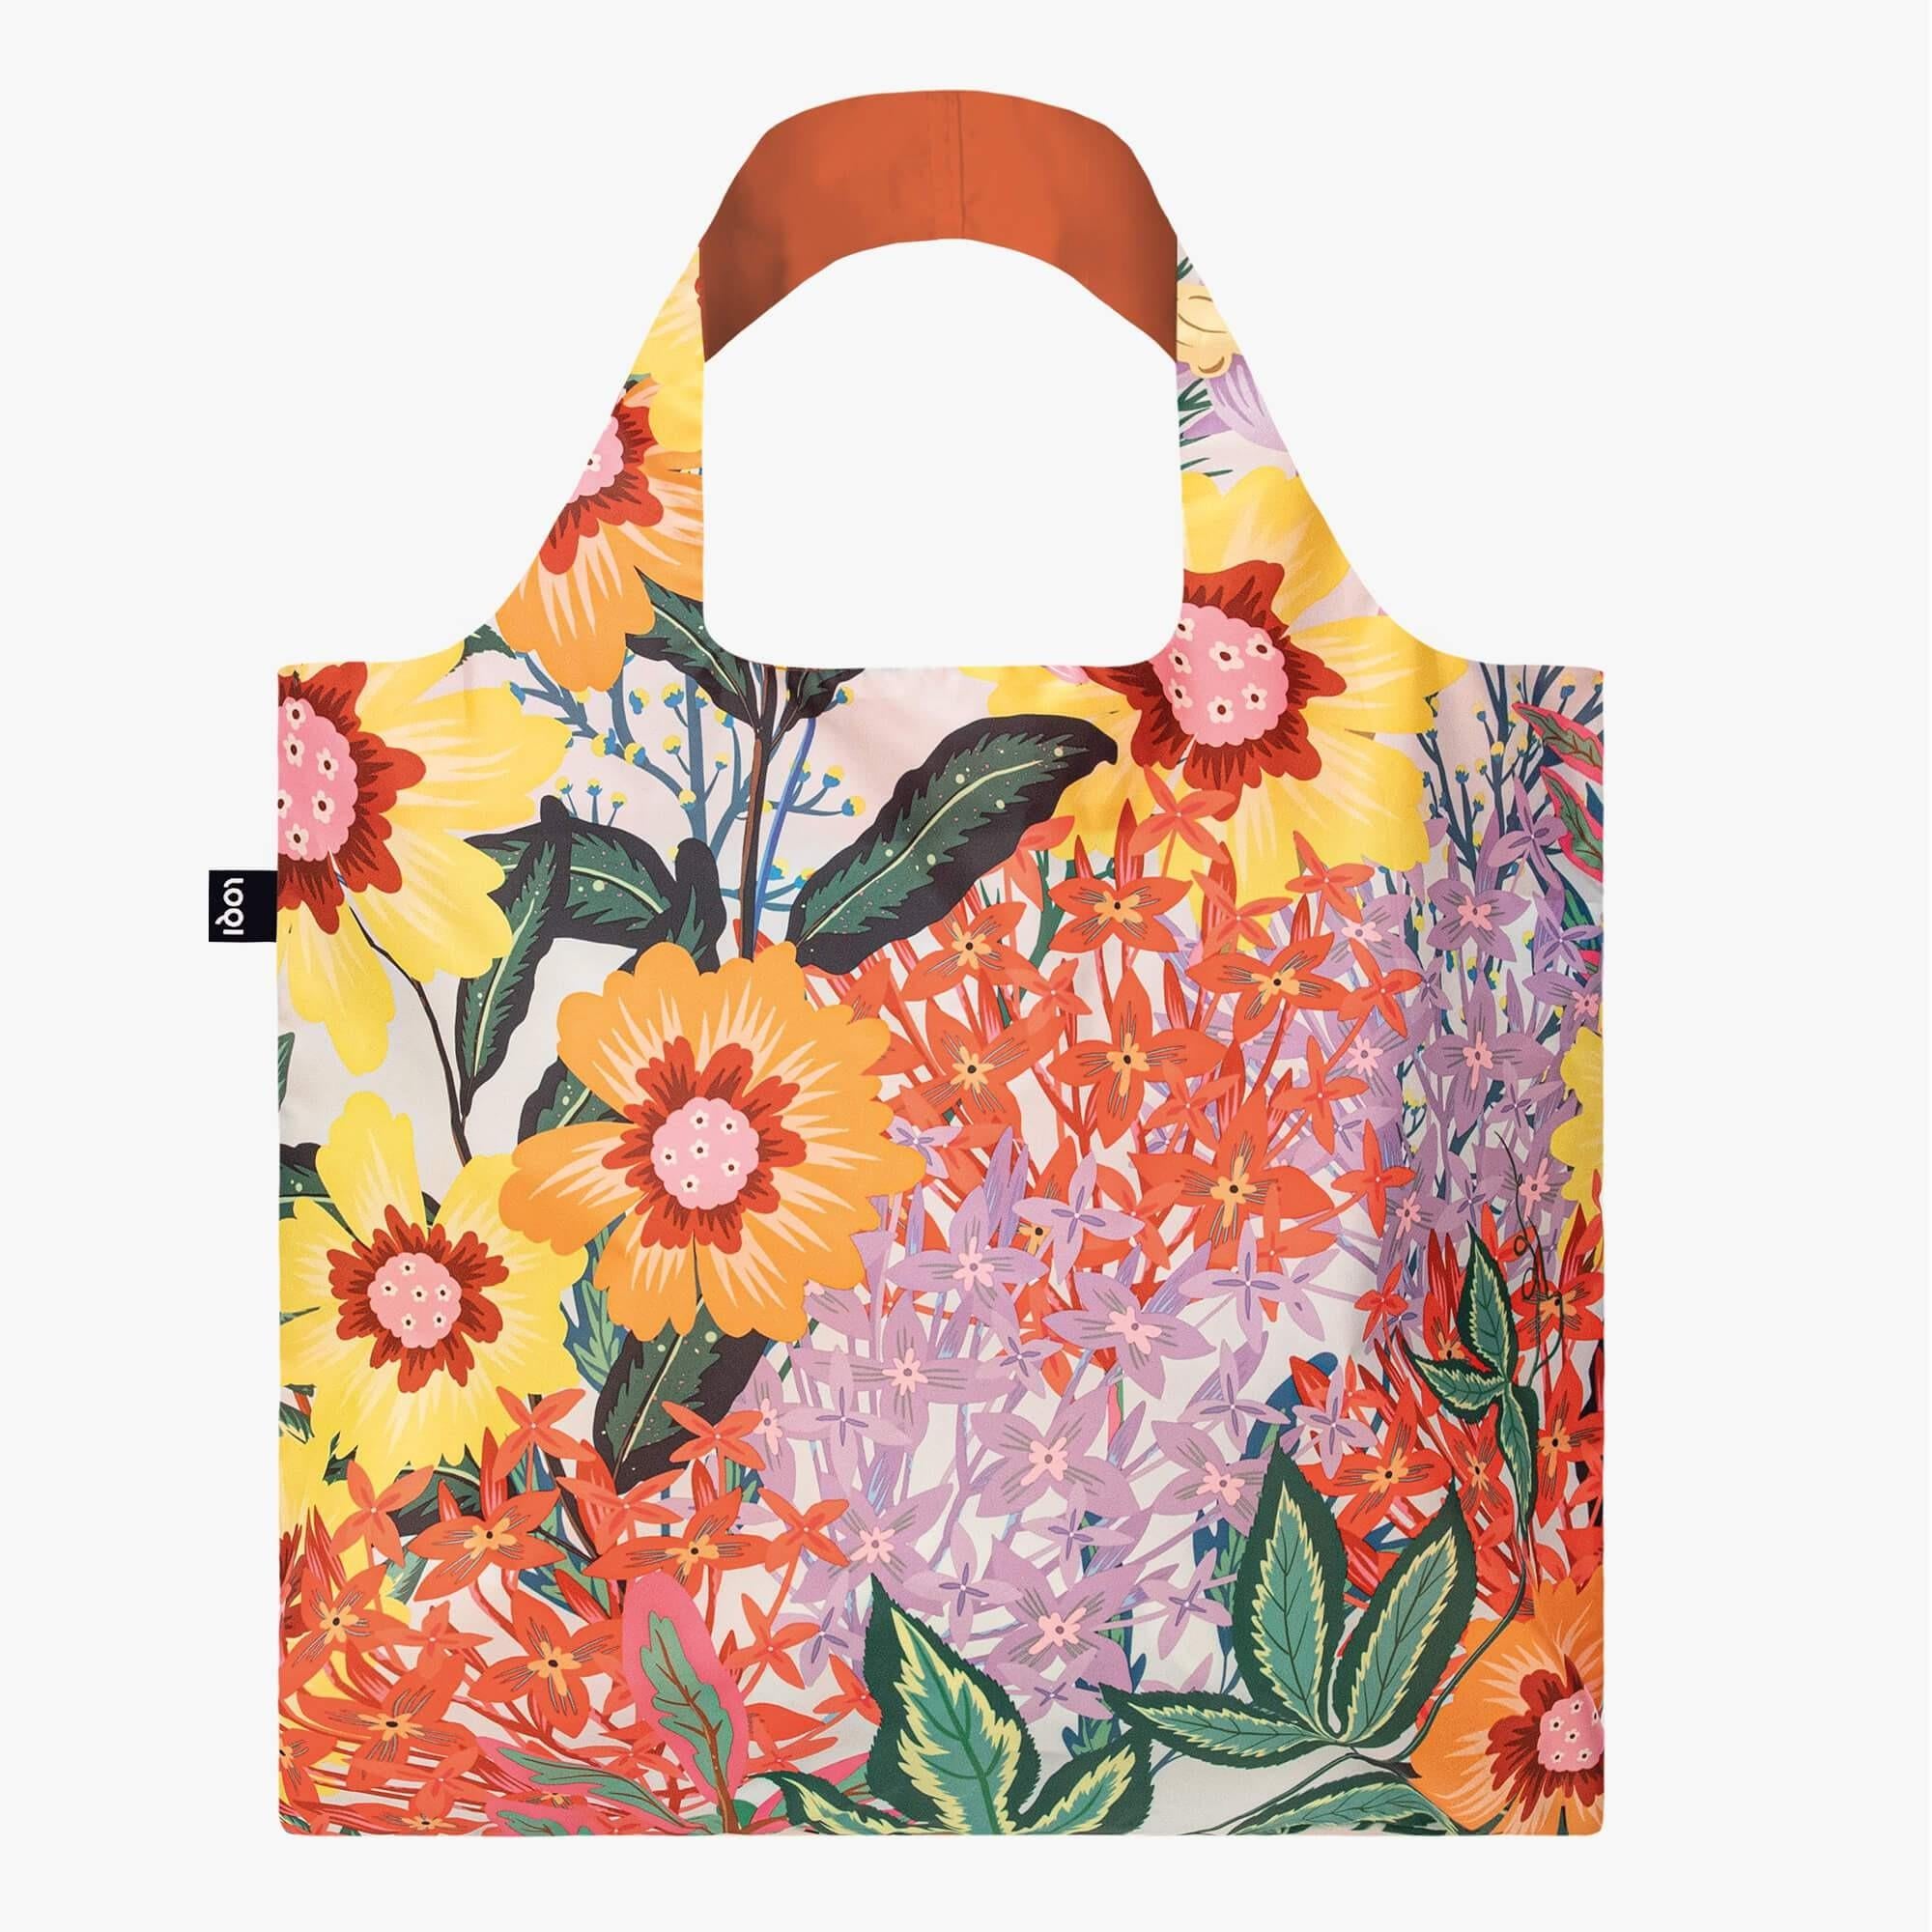 LOQI Recycled Tote Bag, Thai Floral